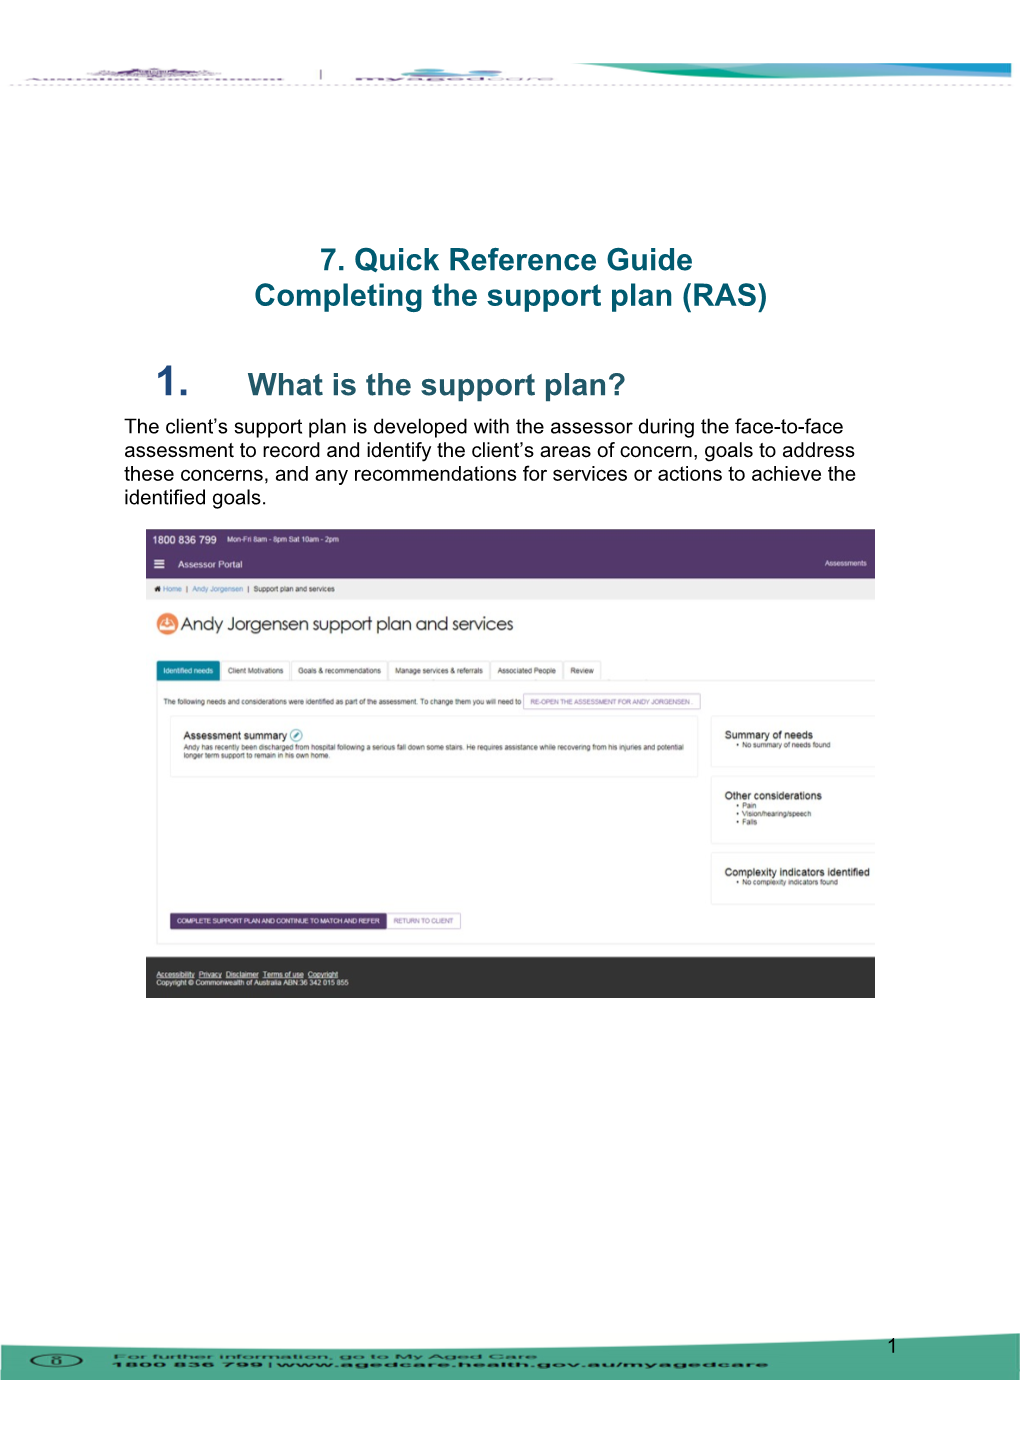 7. Quick Reference Guide Completing the Support Plan (RAS)